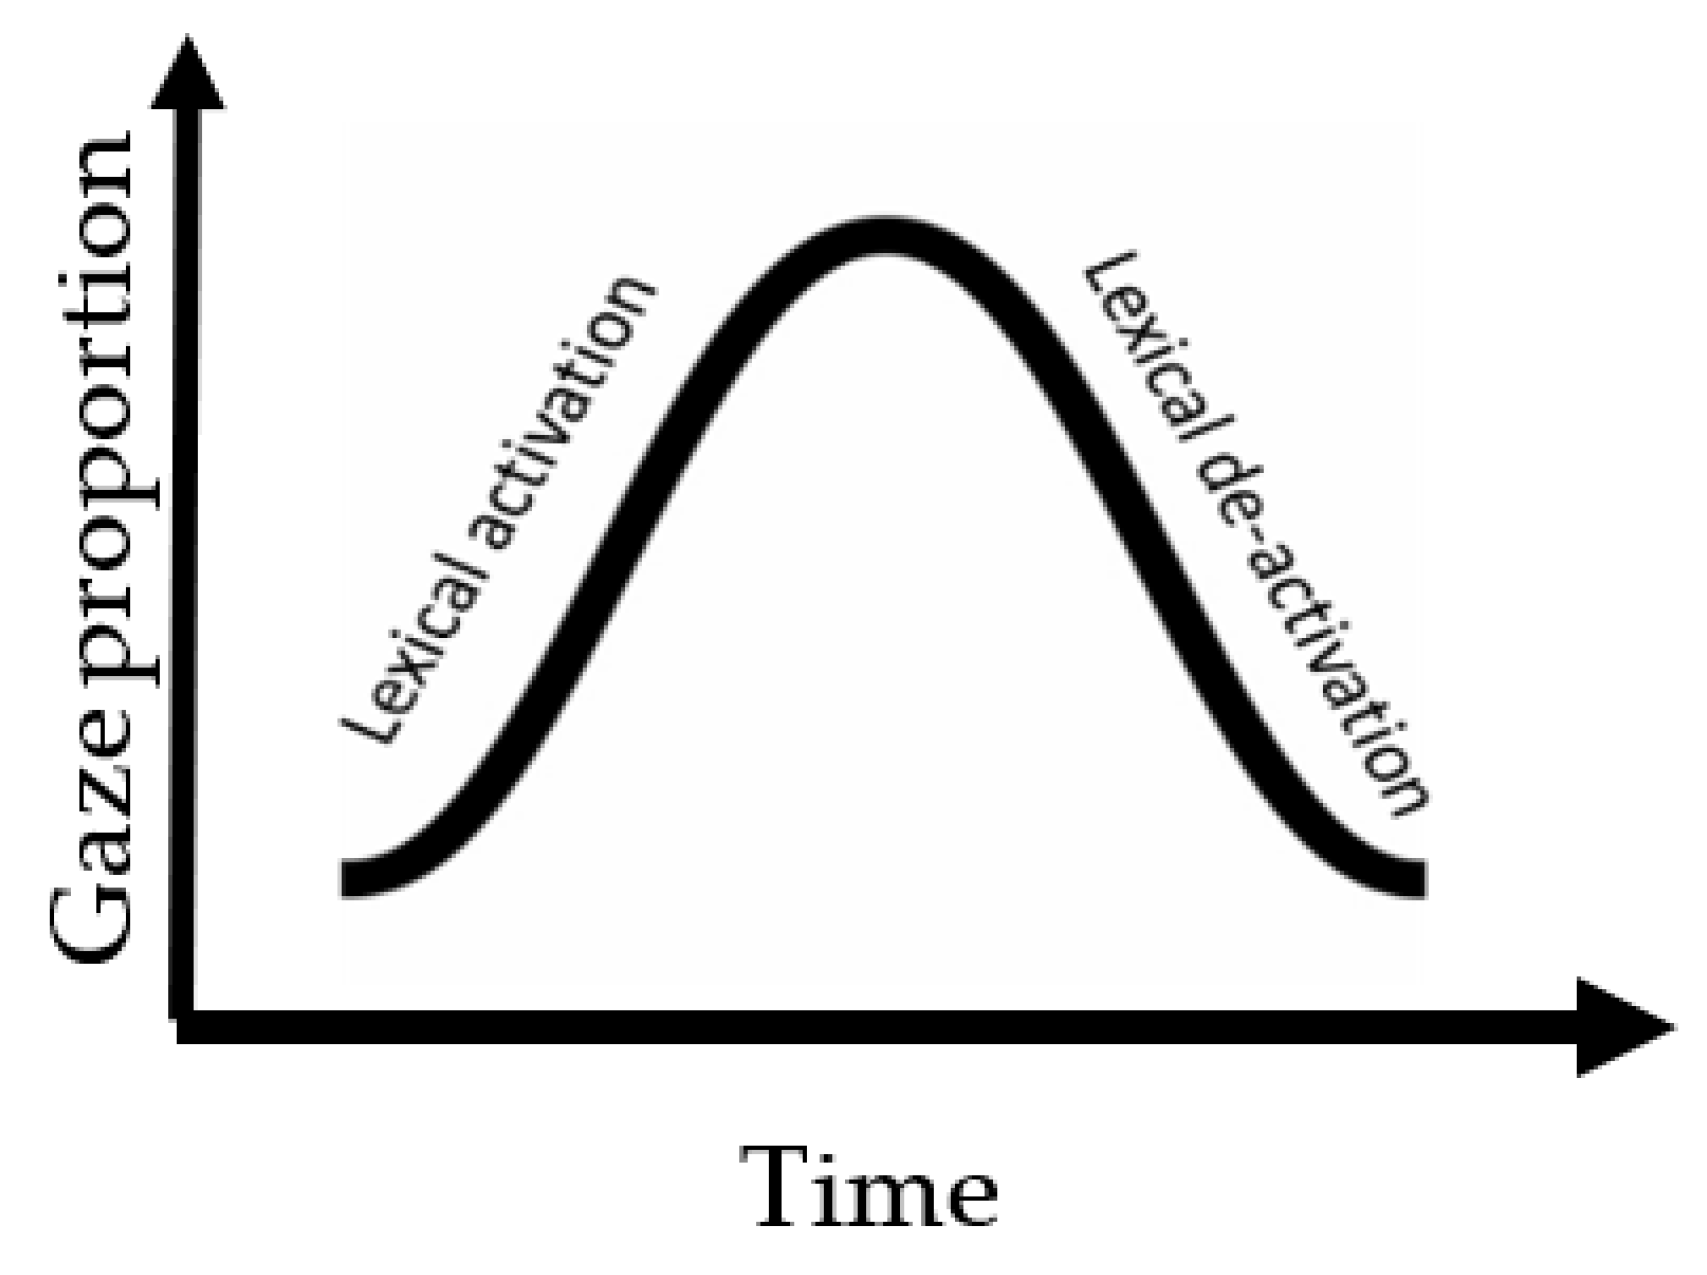 Events versus time in the perception of nonadjacent key